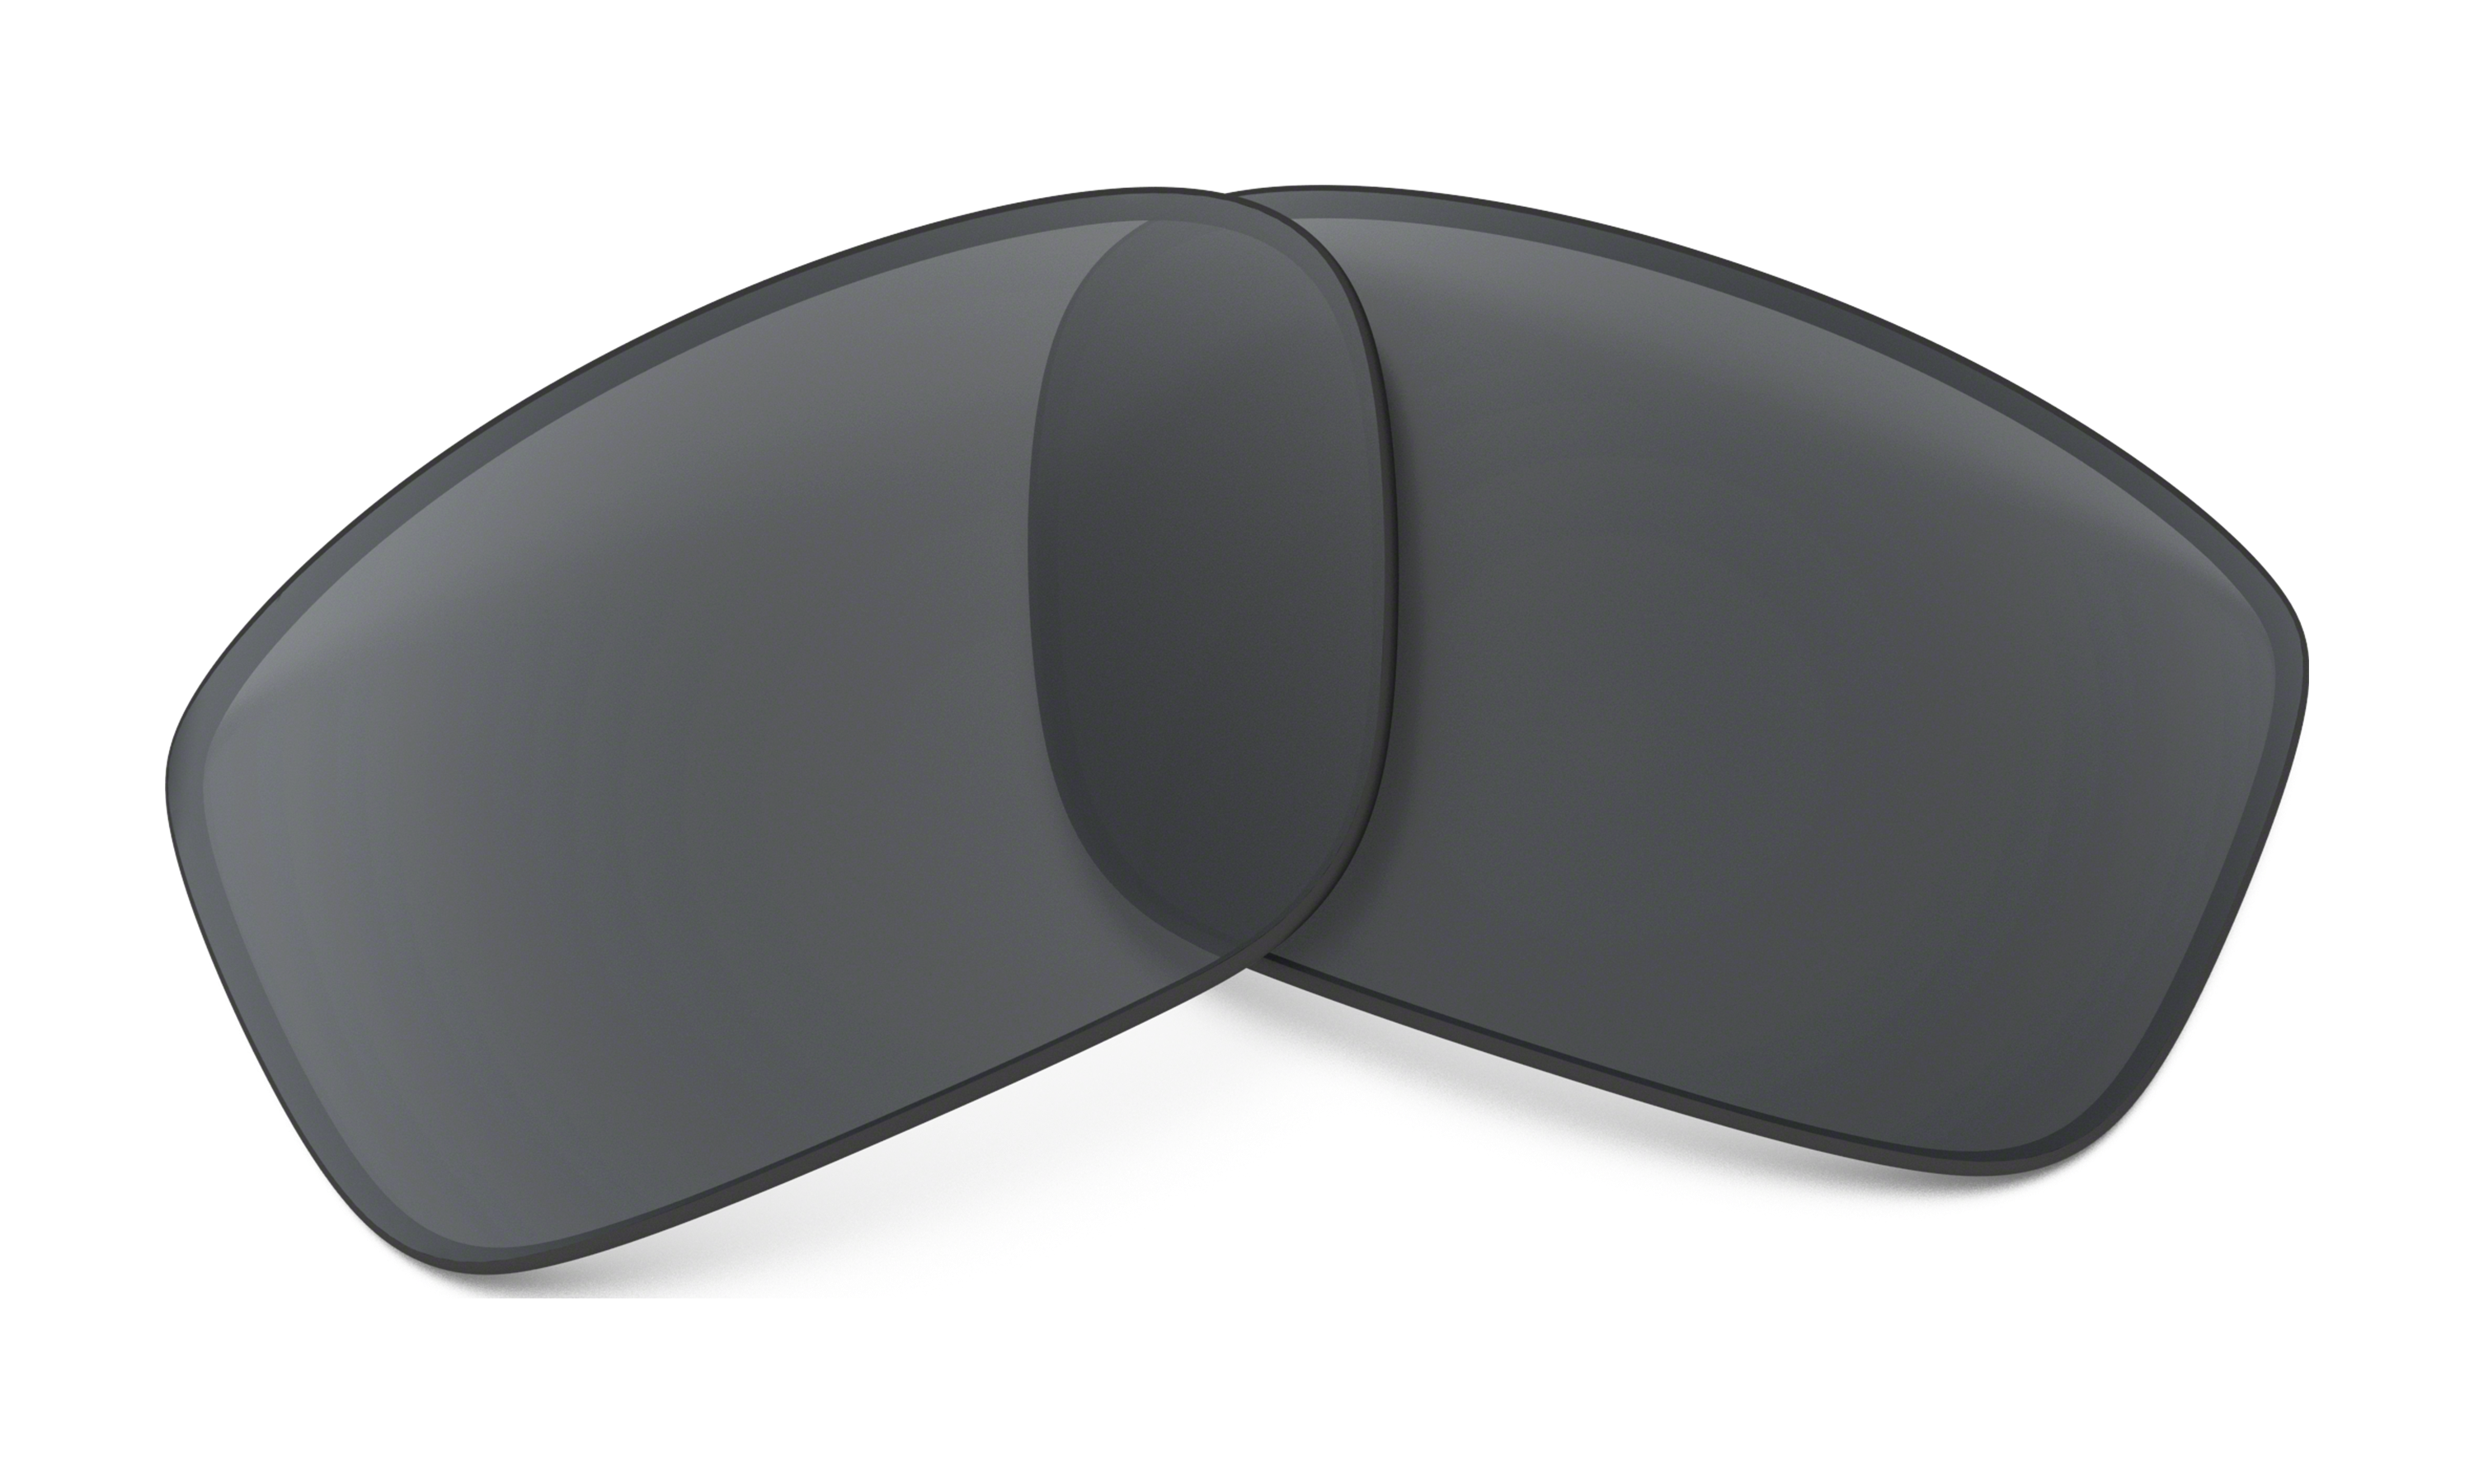 oakley straightlink prizm replacement lenses